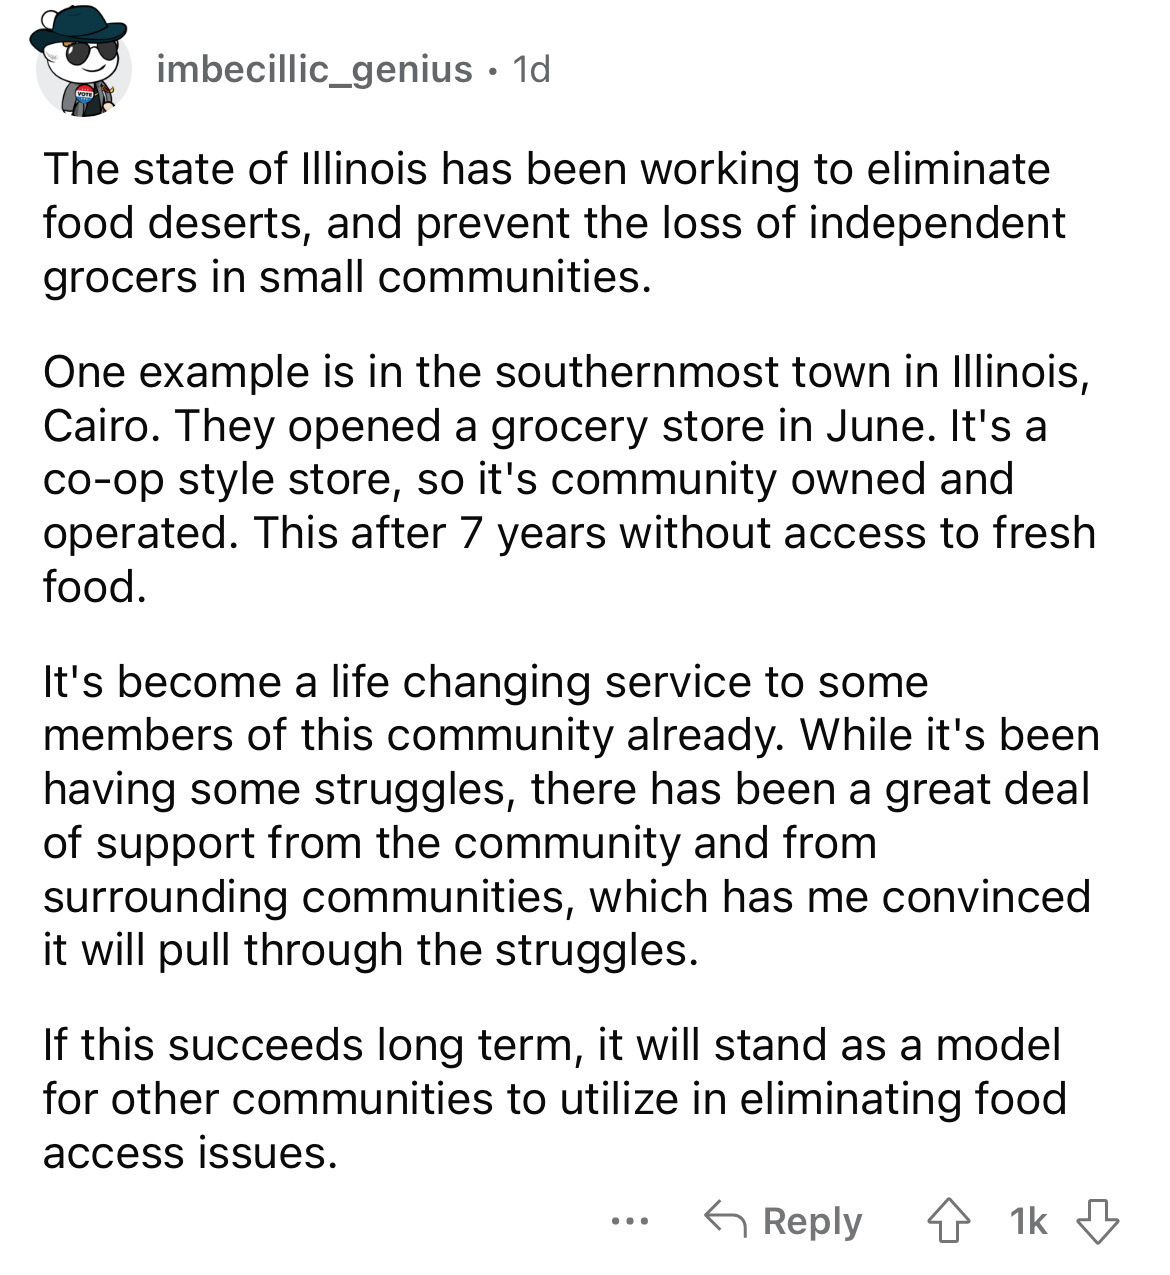 angle - imbecillic_genius. 1d The state of Illinois has been working to eliminate food deserts, and prevent the loss of independent grocers in small communities. One example is in the southernmost town in Illinois, Cairo. They opened a grocery store in Ju